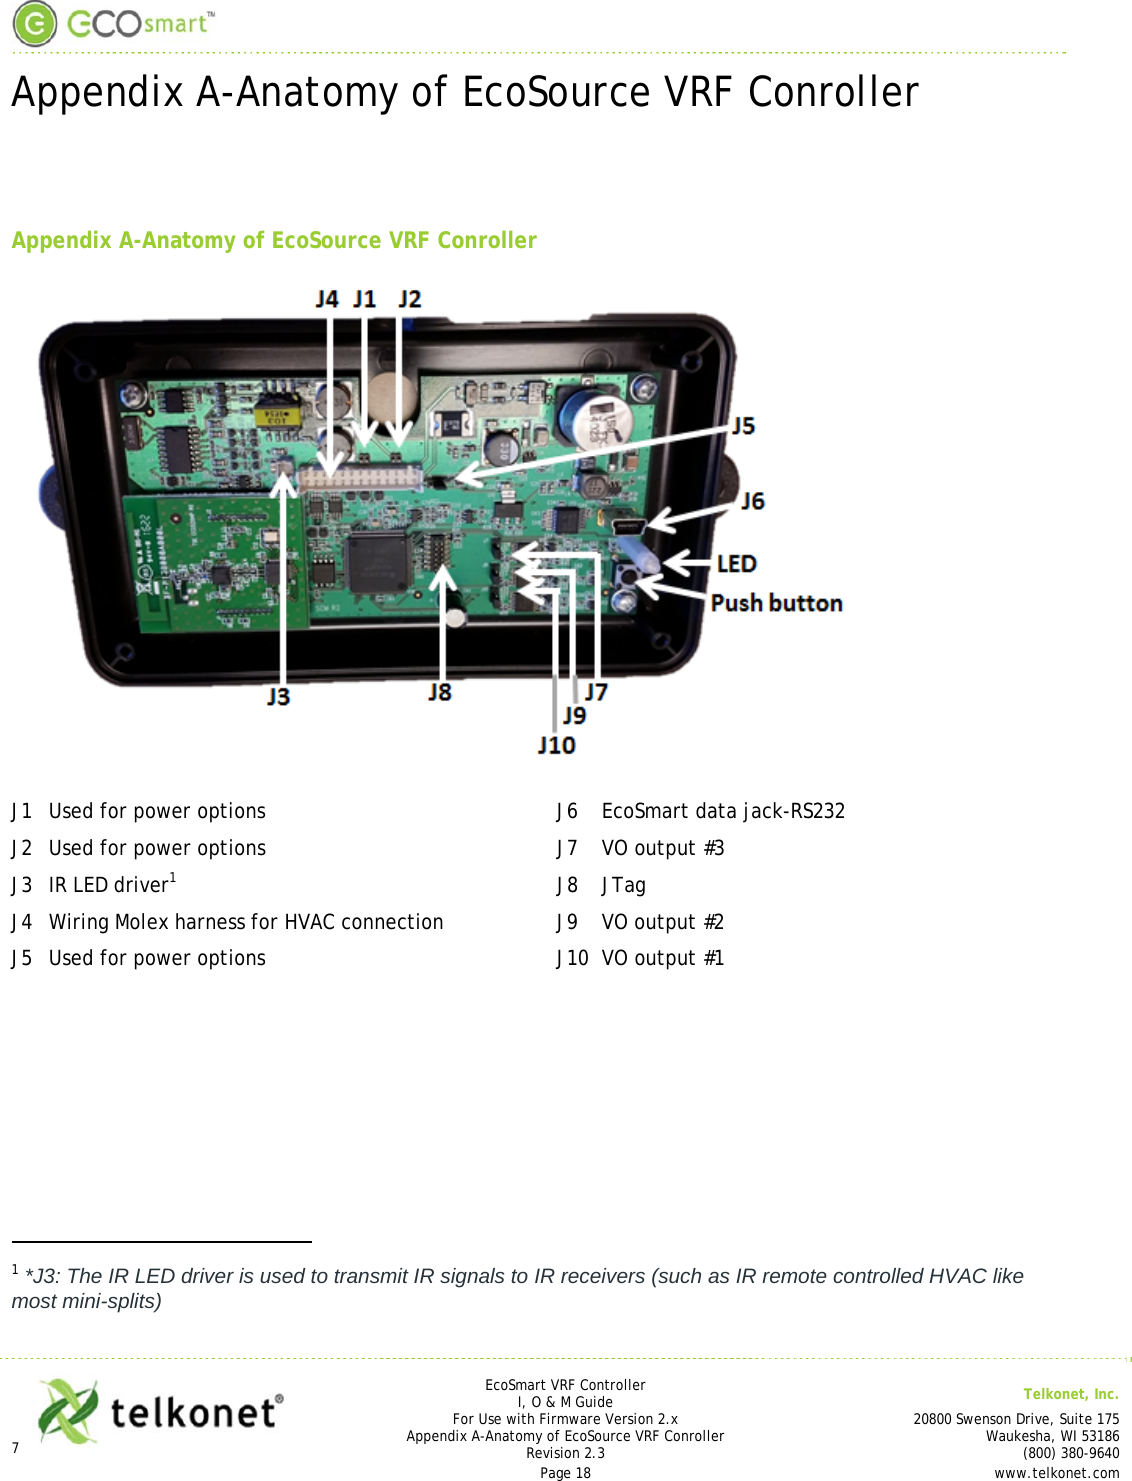  Appendix A-Anatomy of EcoSource VRF Conroller  7       EcoSmart VRF Controller I, O &amp; M Guide  Telkonet, Inc. For Use with Firmware Version 2.x 20800 Swenson Drive, Suite 175 Appendix A-Anatomy of EcoSource VRF Conroller Waukesha, WI 53186 Revision 2.3   (800) 380-9640 Page 18  www.telkonet.com    Appendix A-Anatomy of EcoSource VRF Conroller   J1  Used for power options  J6  EcoSmart data jack-RS232 J2  Used for power options  J7  VO output #3 J3  IR LED driver1 J8 JTag J4  Wiring Molex harness for HVAC connection  J9  VO output #2 J5  Used for power options  J10  VO output #1                                                     1 *J3: The IR LED driver is used to transmit IR signals to IR receivers (such as IR remote controlled HVAC like most mini-splits)  